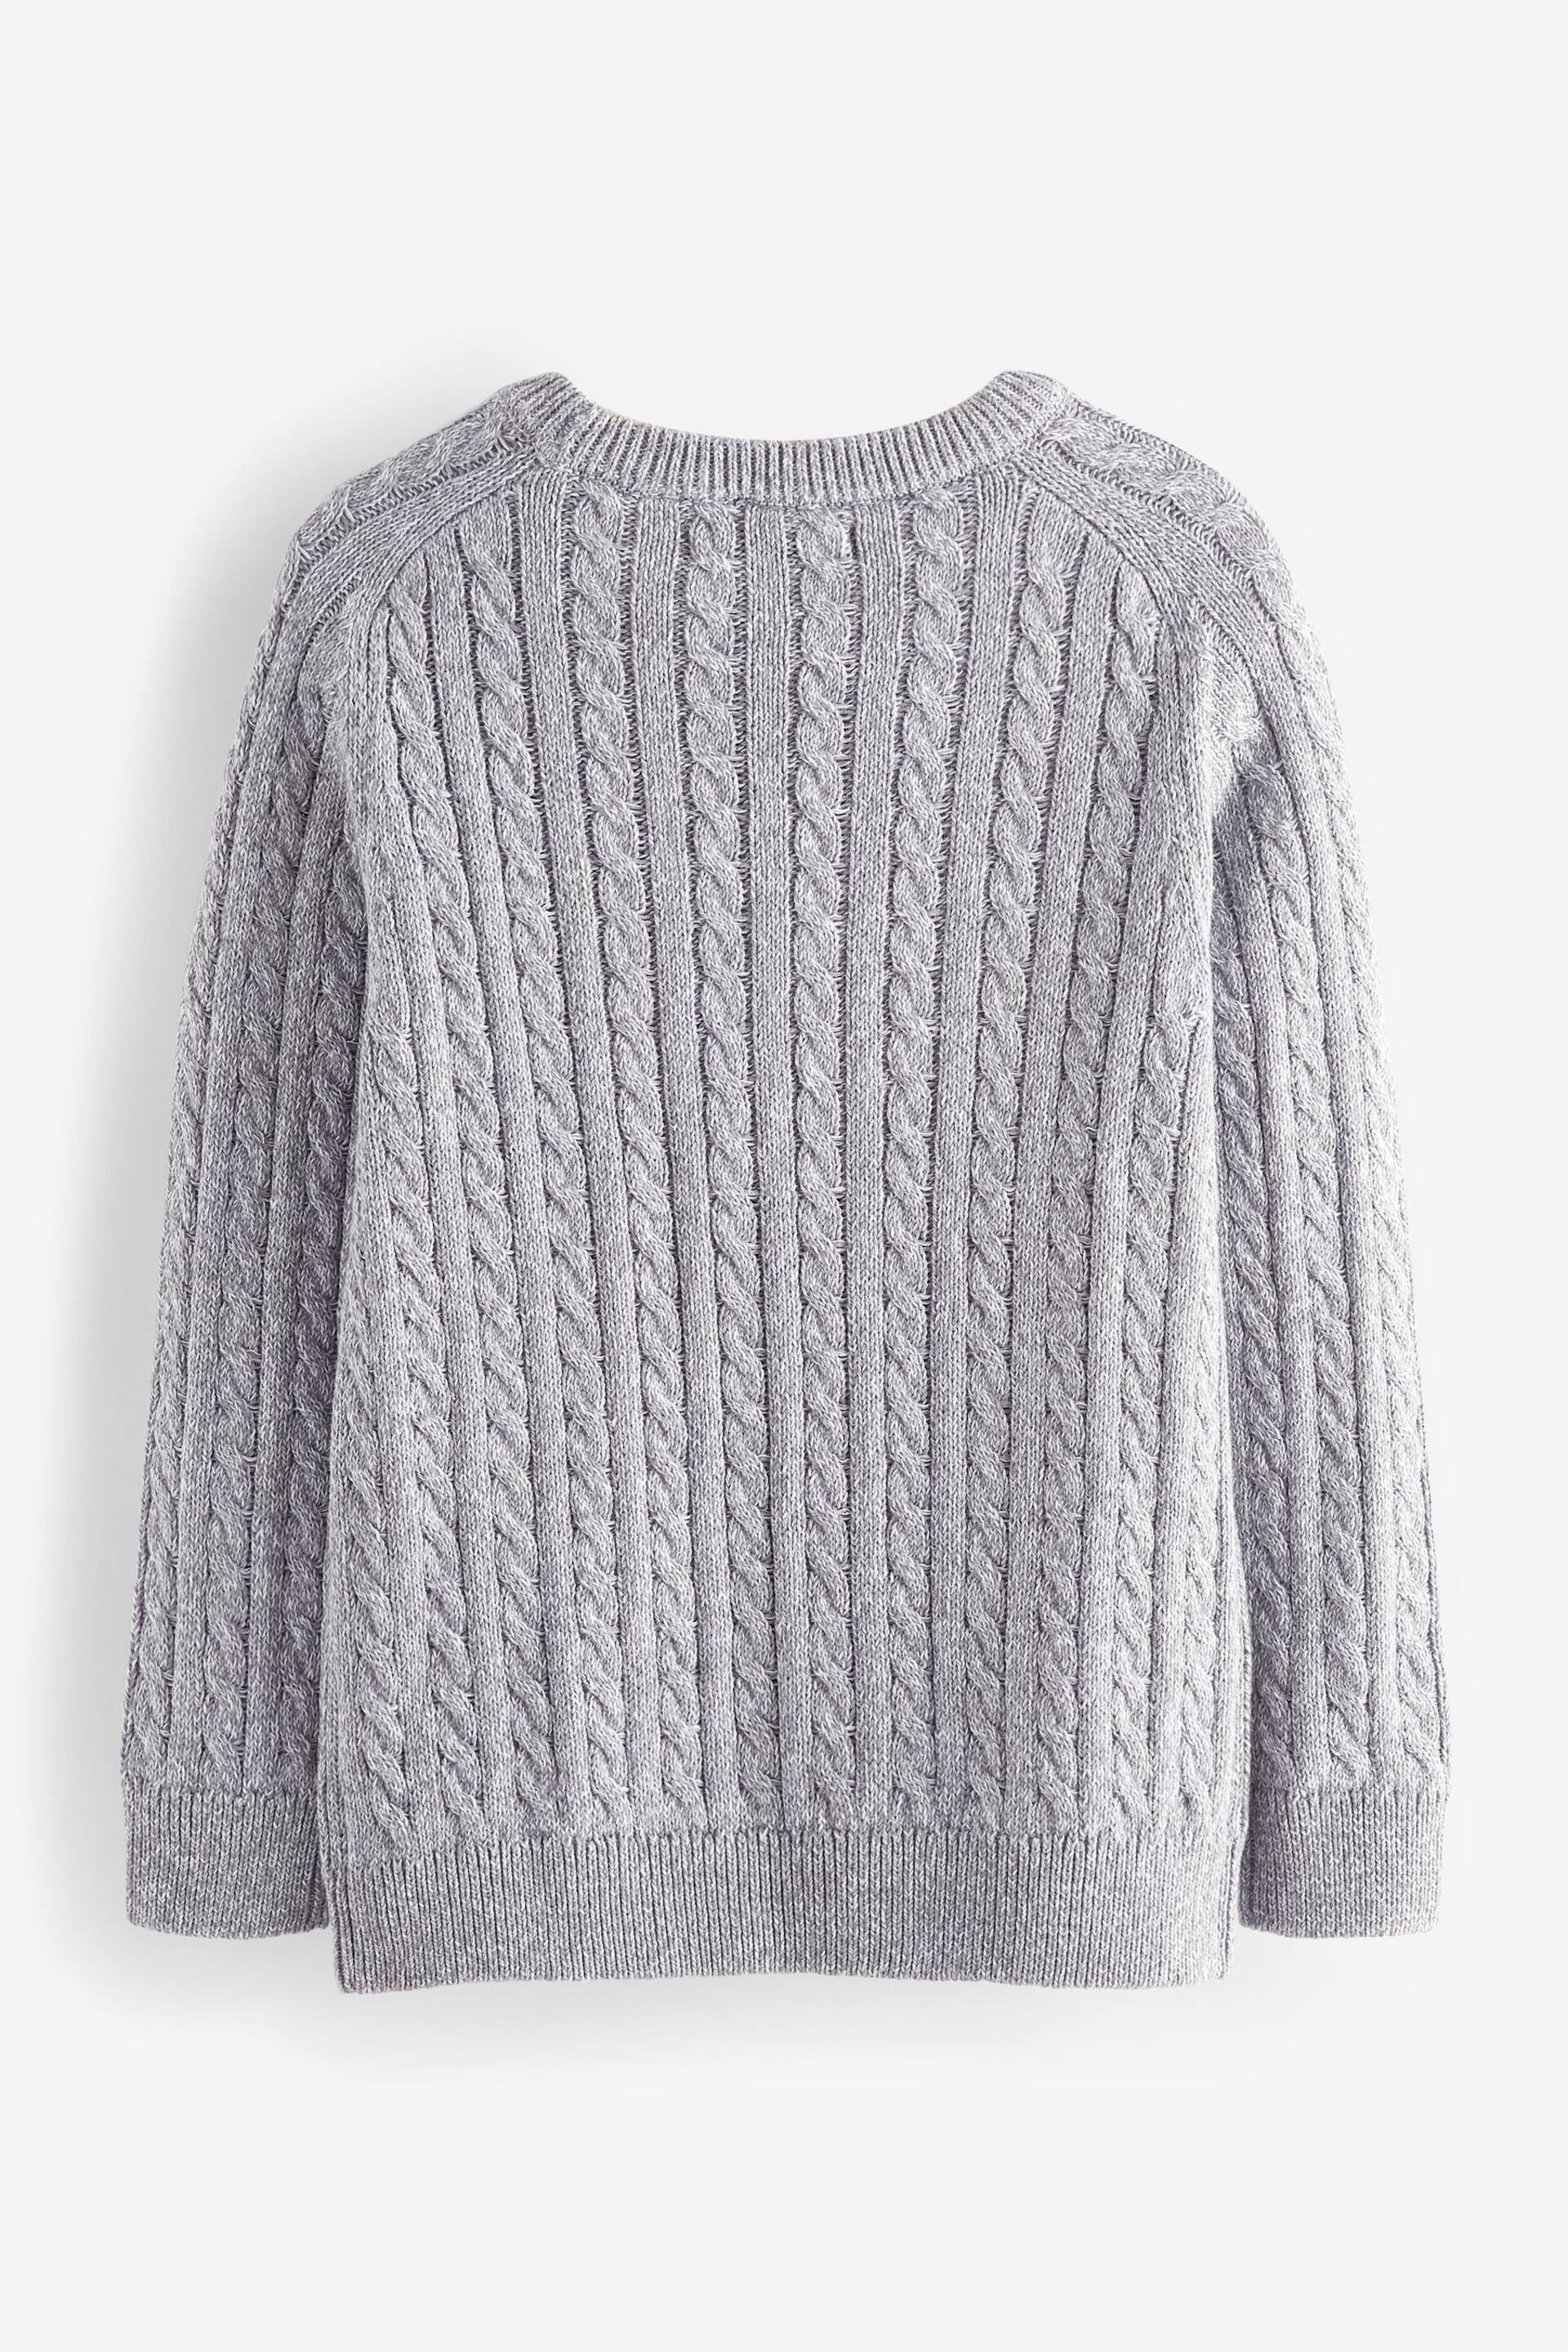 Grey Knitted Cable Crew Neck Jumper (3-16yrs) - Image 2 of 3